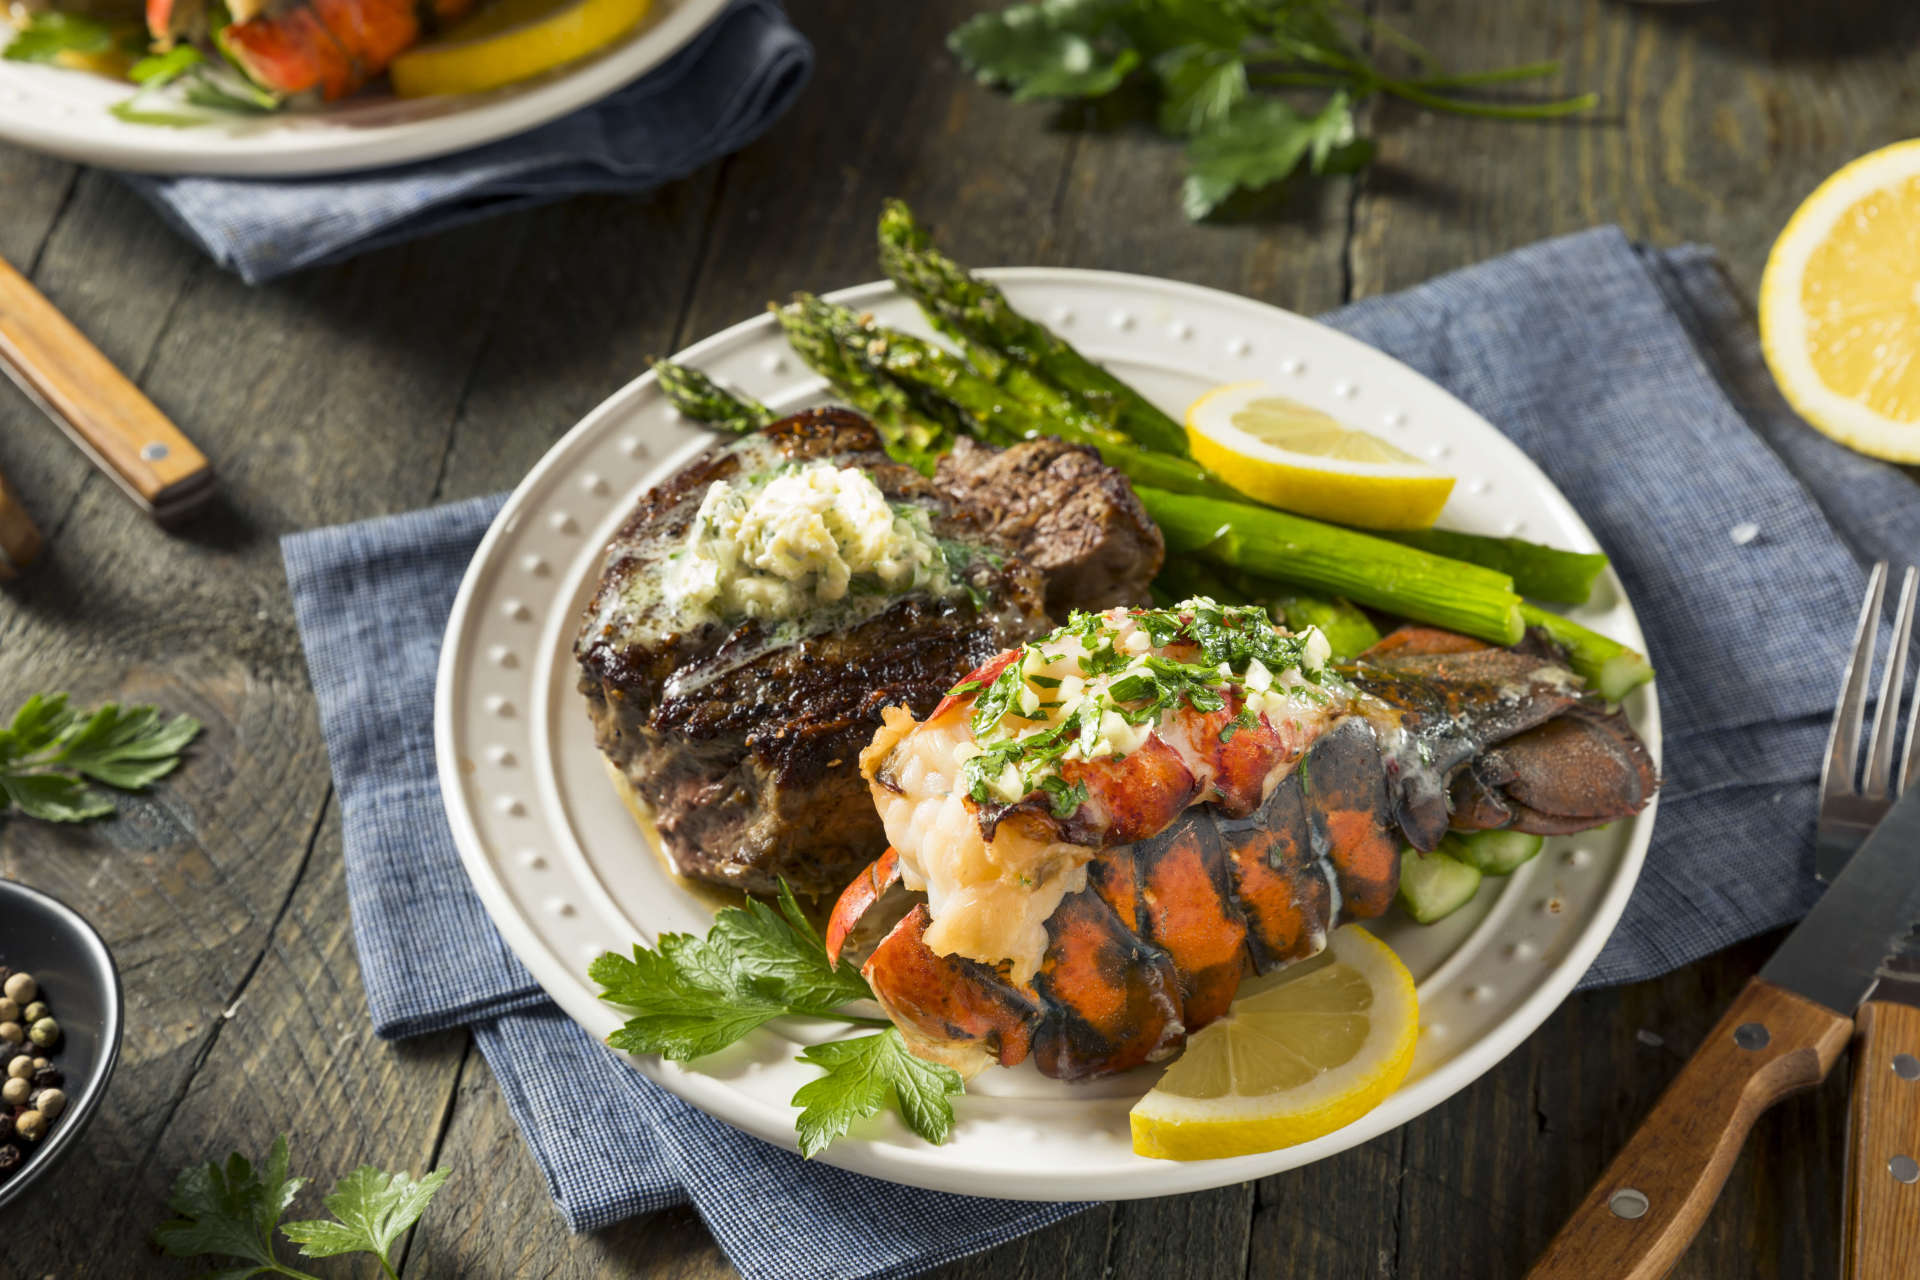 Lobster Tail and Steak